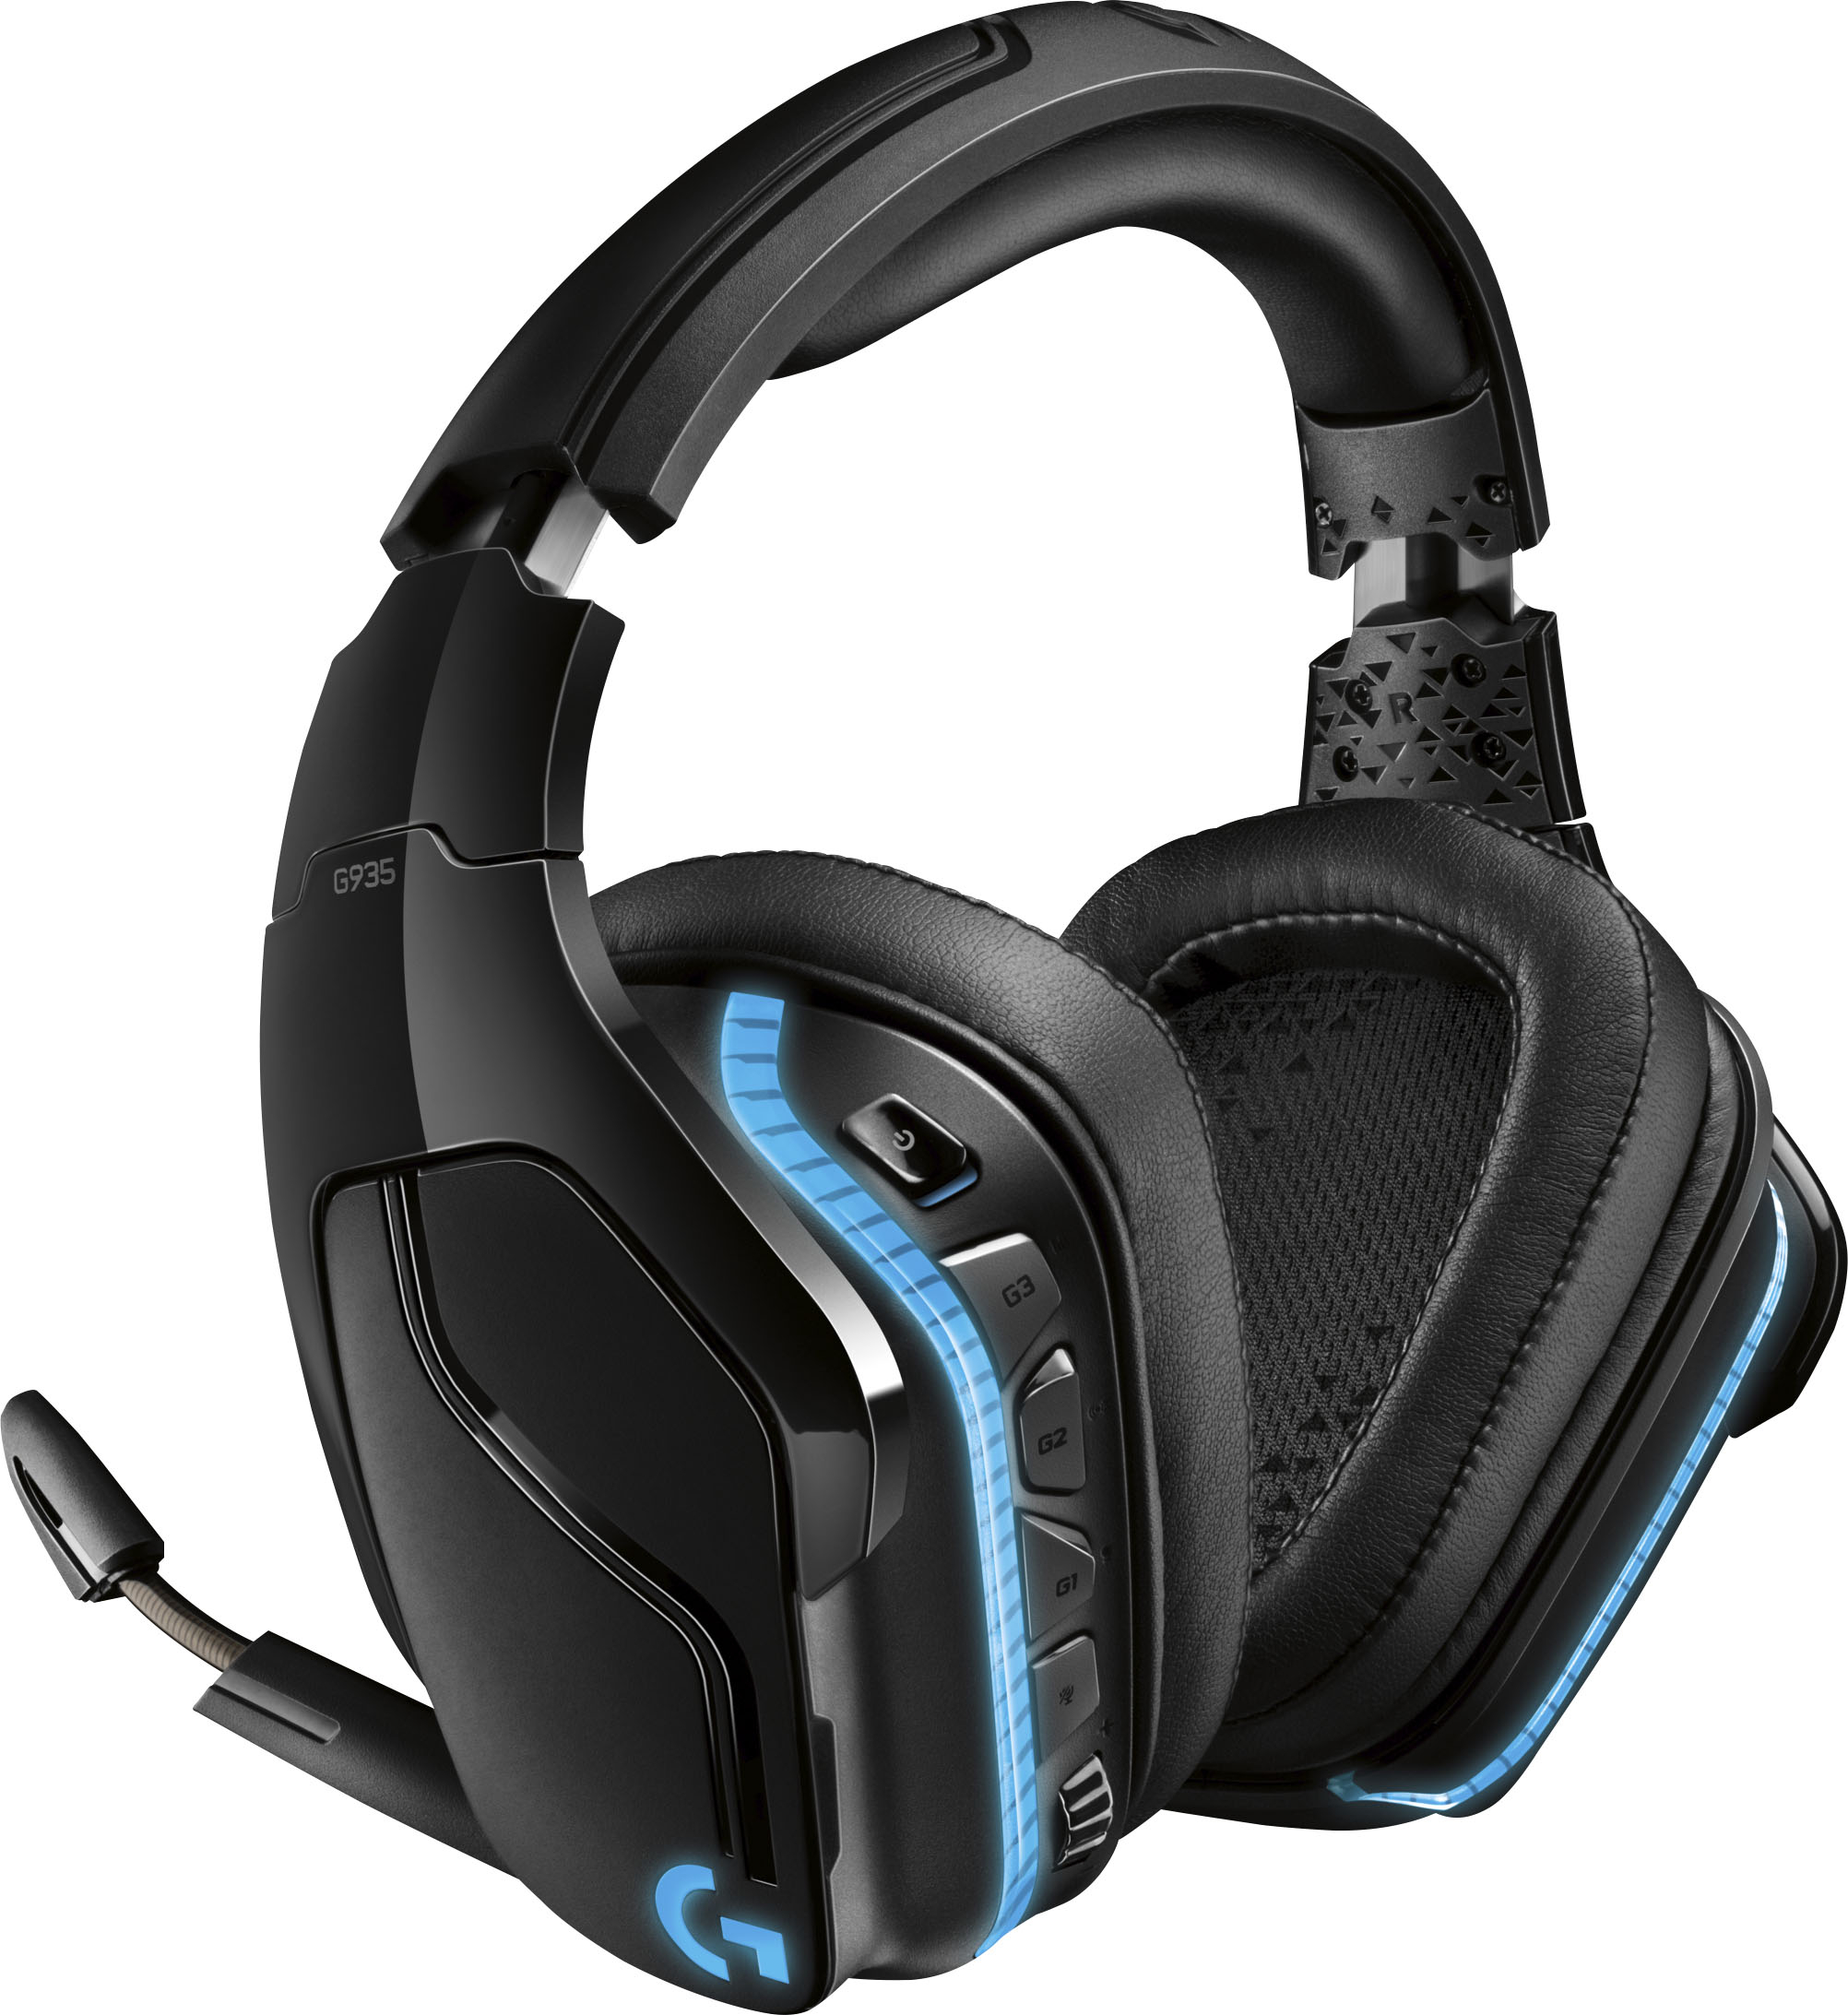 Levendig artikel graven Logitech G935 Wireless 7.1 Surround Sound Over-the-Ear Gaming Headset for  PC with LIGHTSYNC RGB Lighting Black/Blue 981-000742 - Best Buy